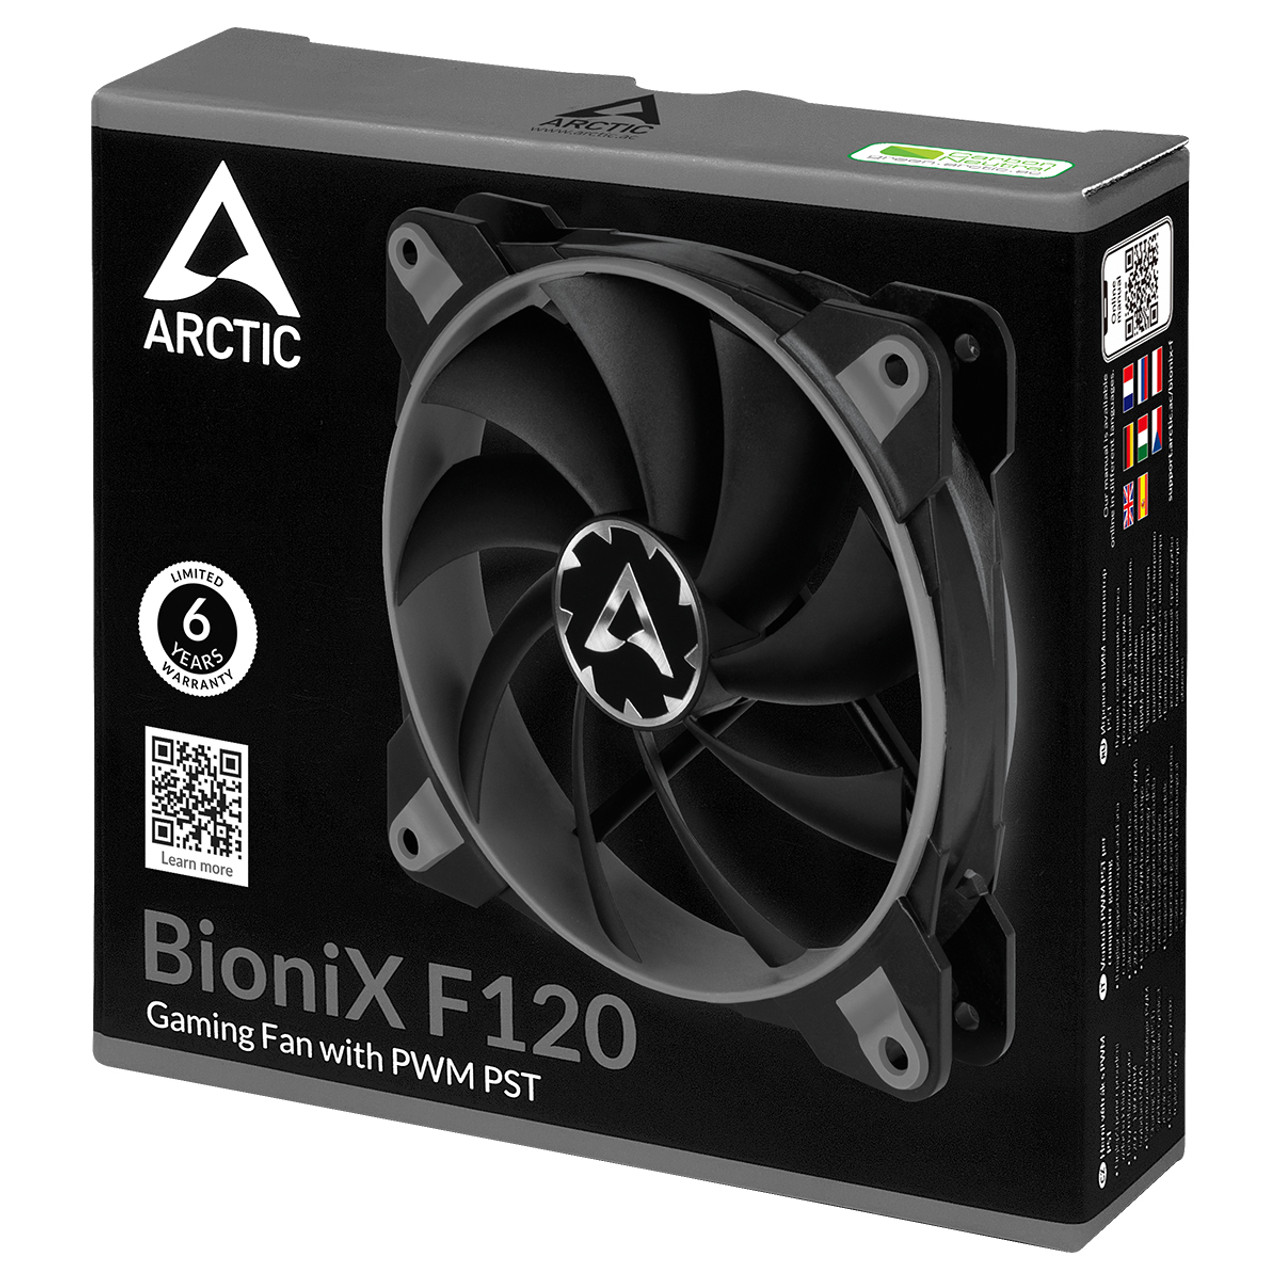 Arctic ACFAN00163A BioniX F120-120 mm Gaming Case Fan with PWM Sharing Technology (PST), 200–1800 RPM - Grey